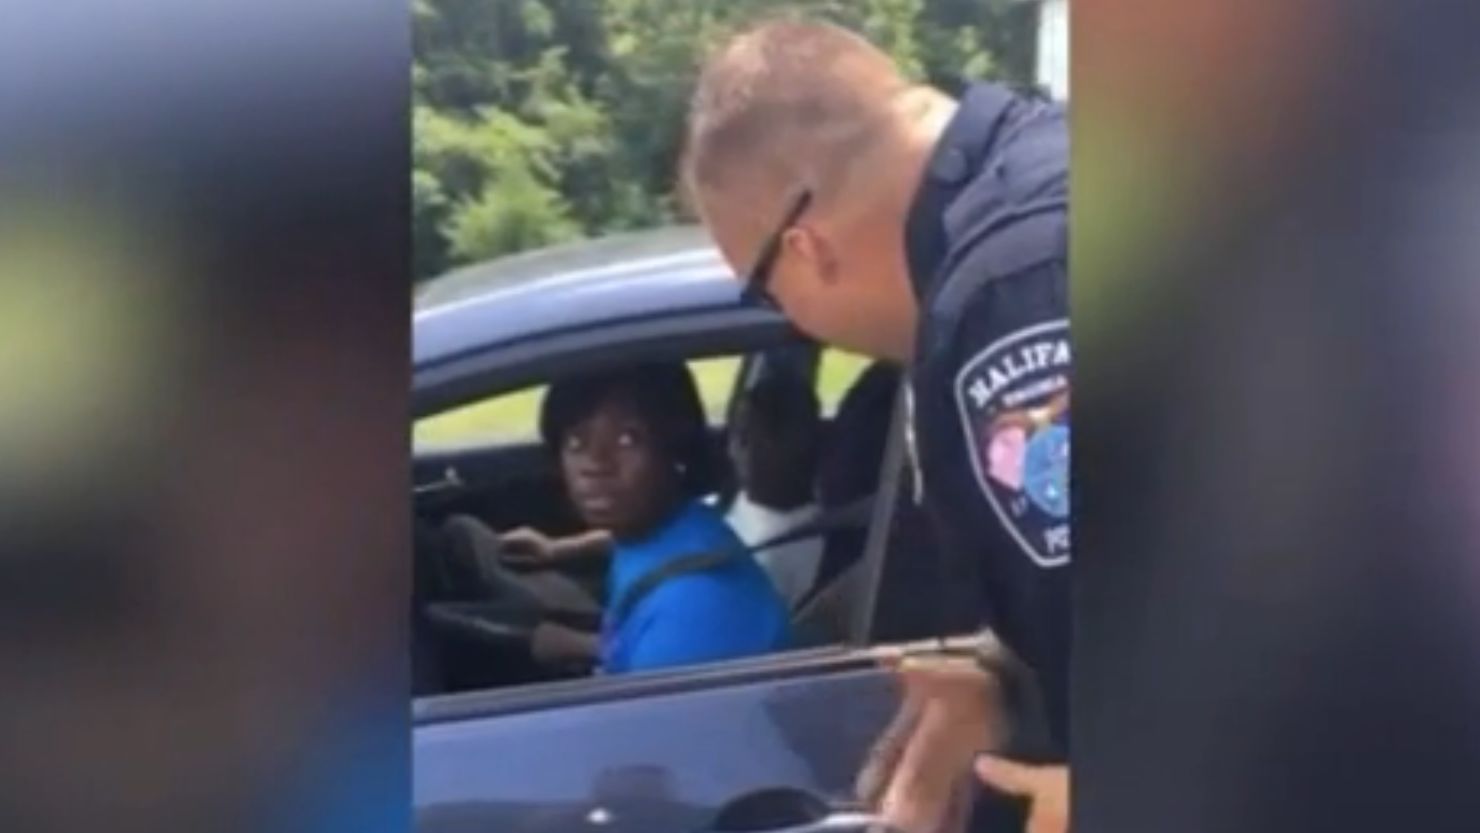 This driver got a sweet, and unexpected, surprise from the Halifax, Virginia, police department.